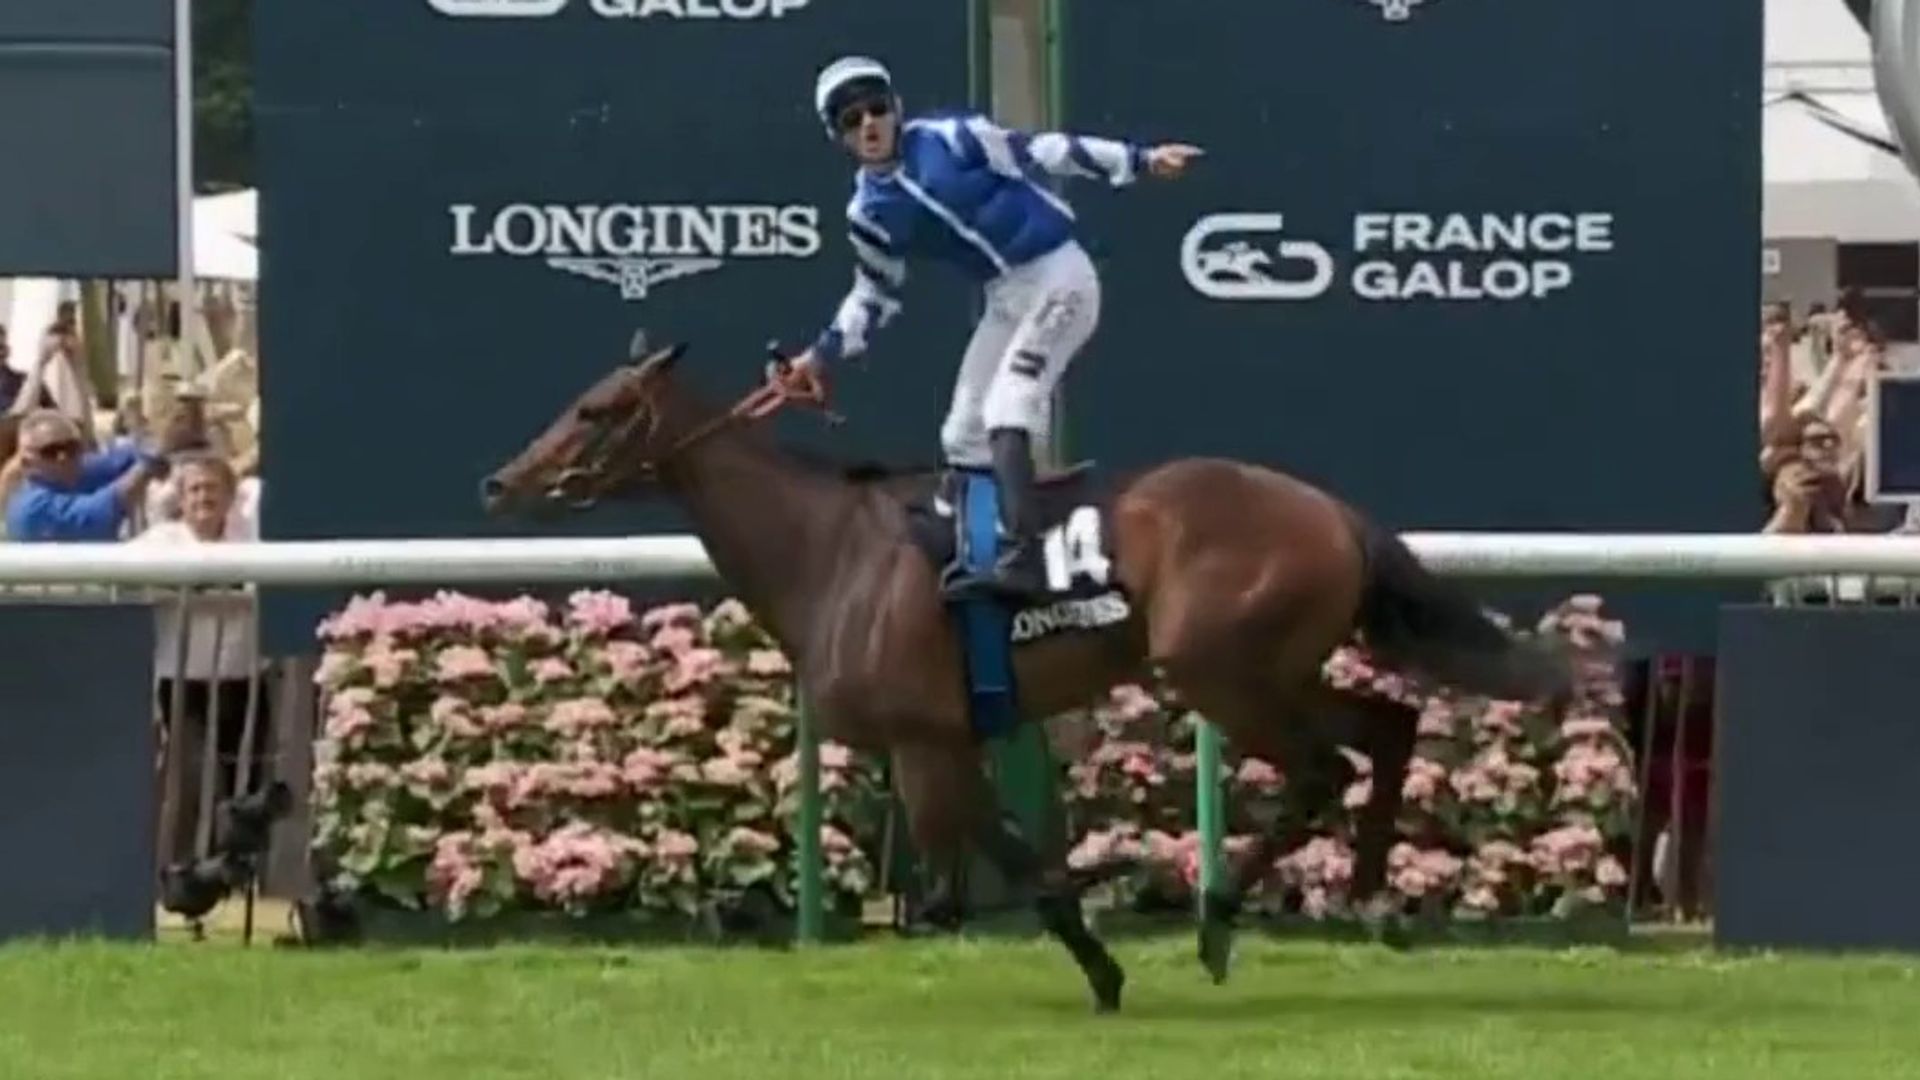 She's special! Blue Rose Cen destroys Diane rivals at Chantilly